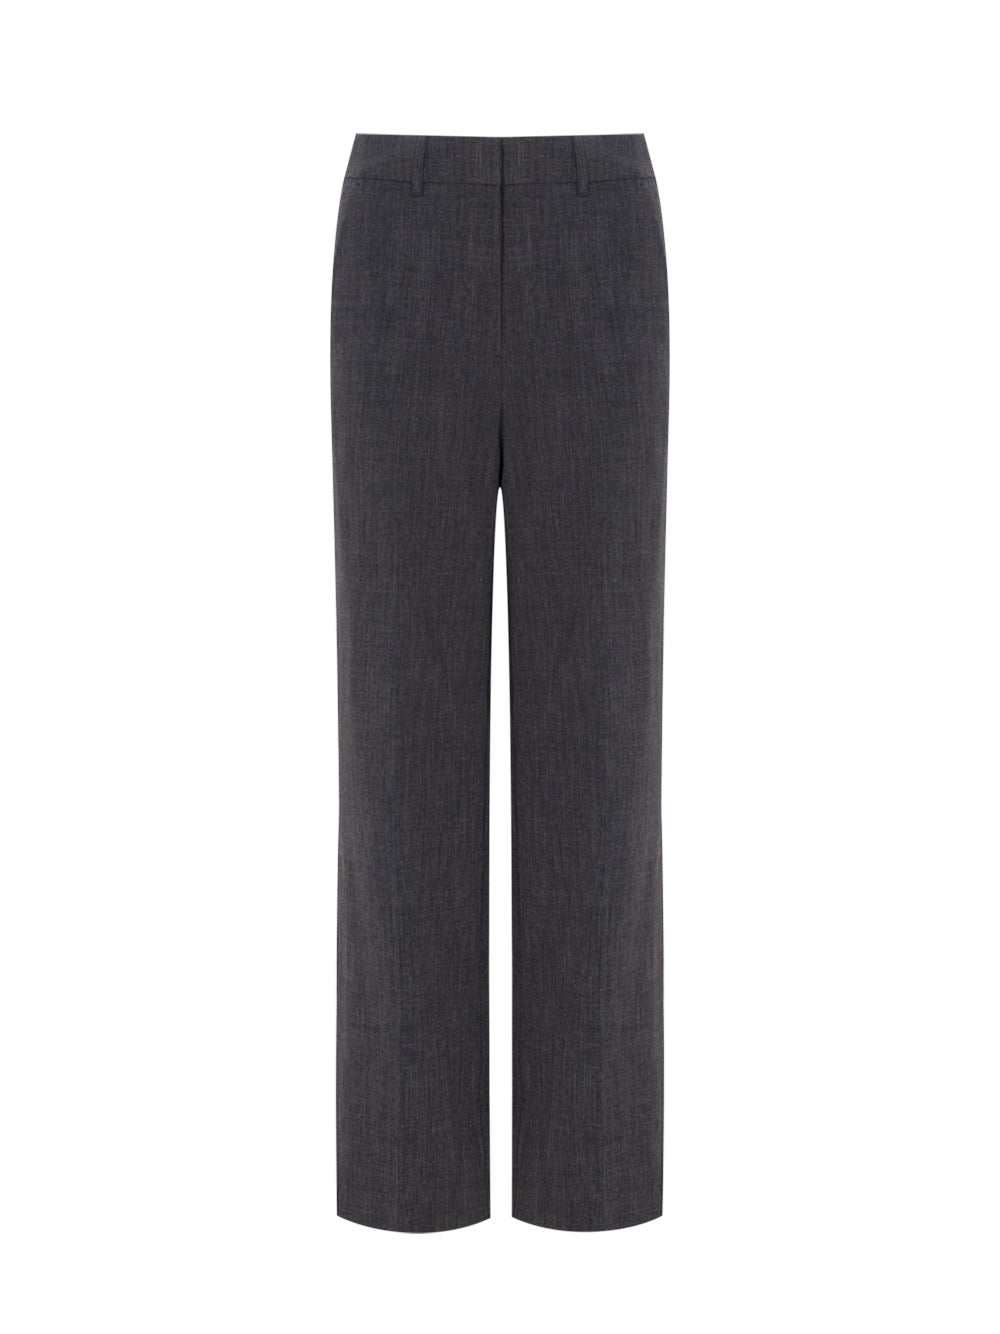 Woven Pants With Openings On The Bottom (Anthracite)